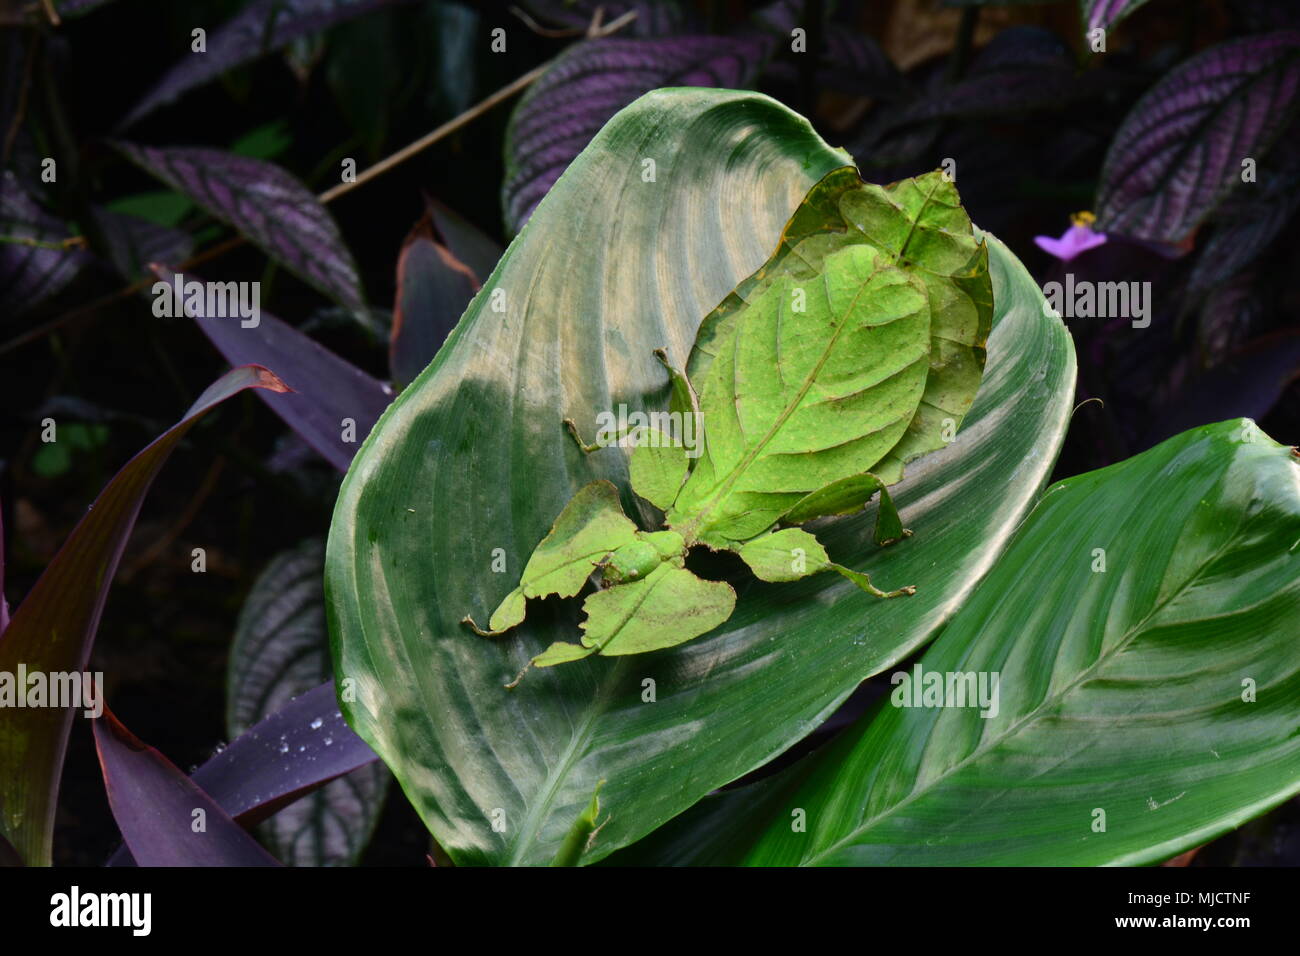 Giant leaf insect sits on a plant leaf in the gardens. Stock Photo